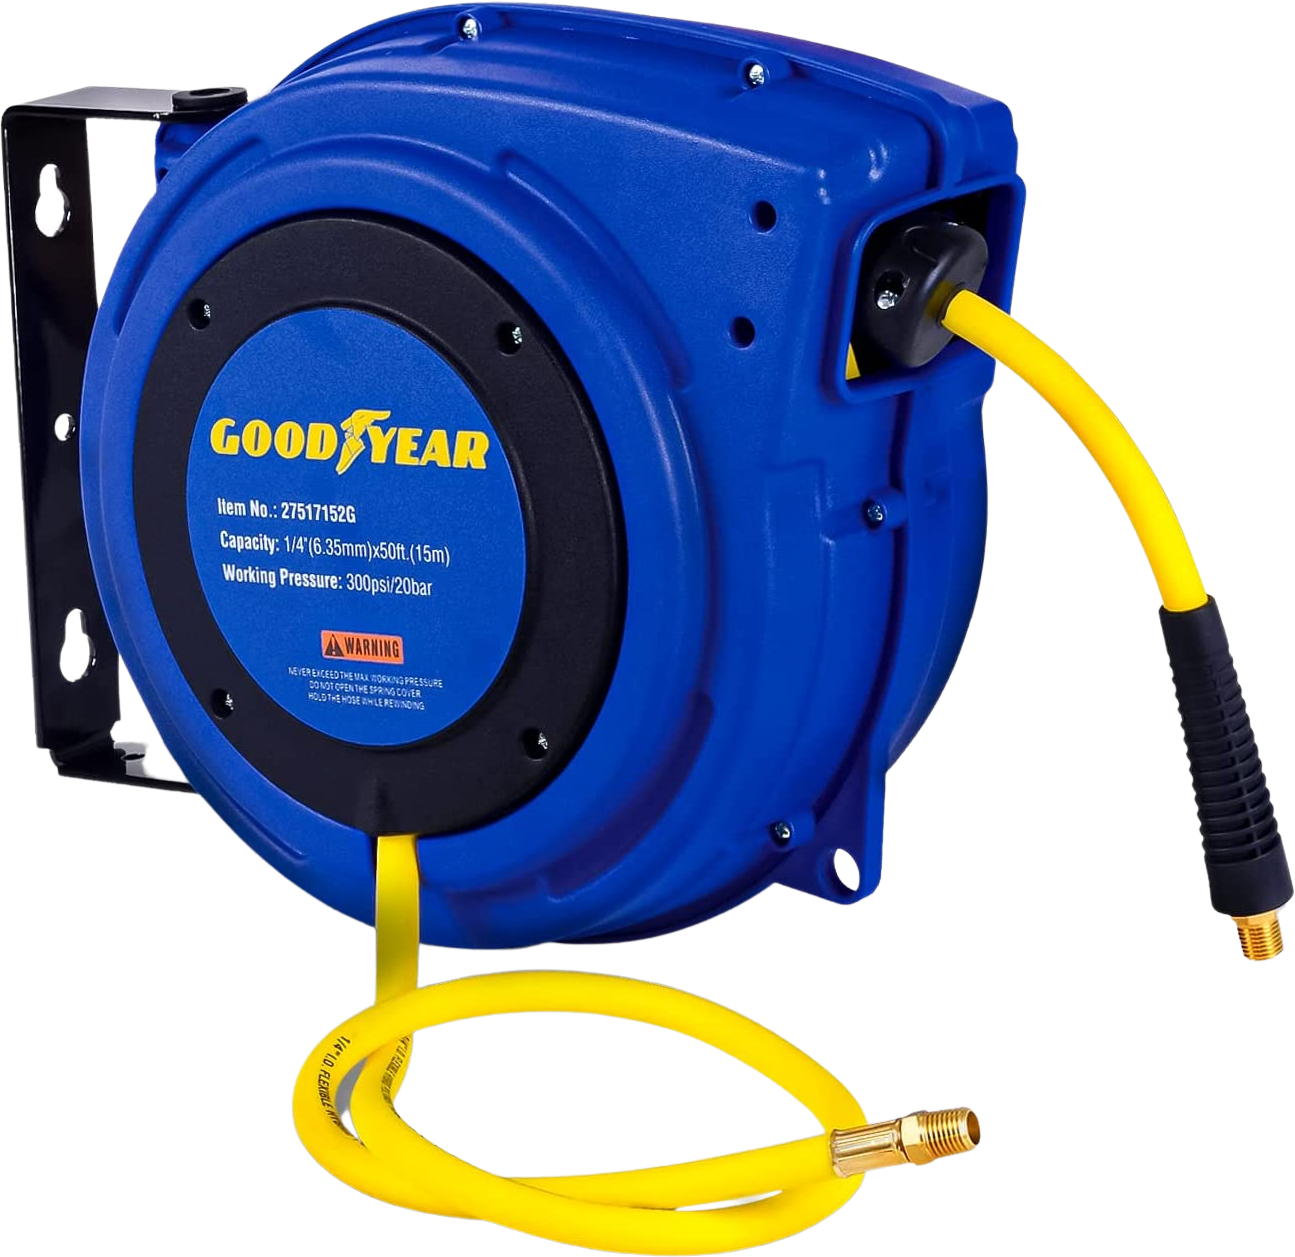 Goodyear, Goodyear GUR008 Retractable Hose Reel Air/Water 300 PSI 1/4" x 50' 1/4" NPT Connection New